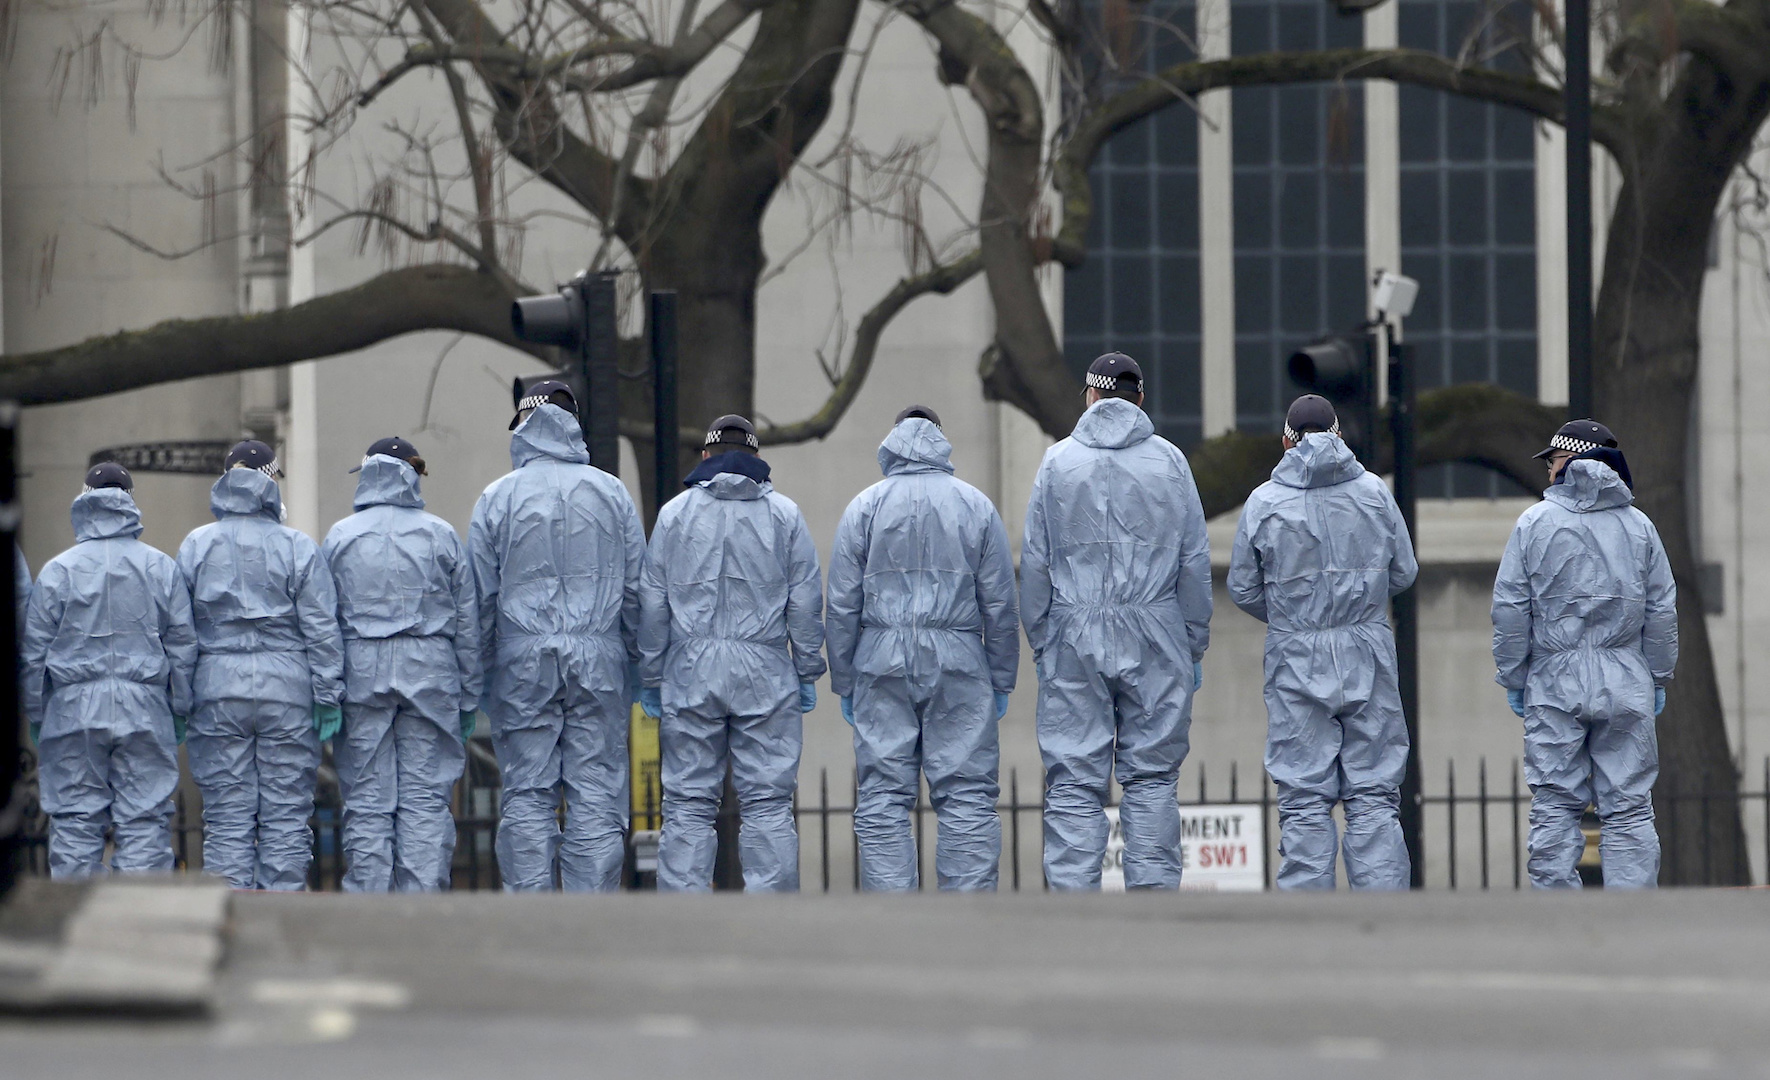 Forensic officers prepare to crawl on the road next to Westminster Abbey to look for evidence March 23, the day after an attack in London. (CNS photo/Neil Hall, Reuters)